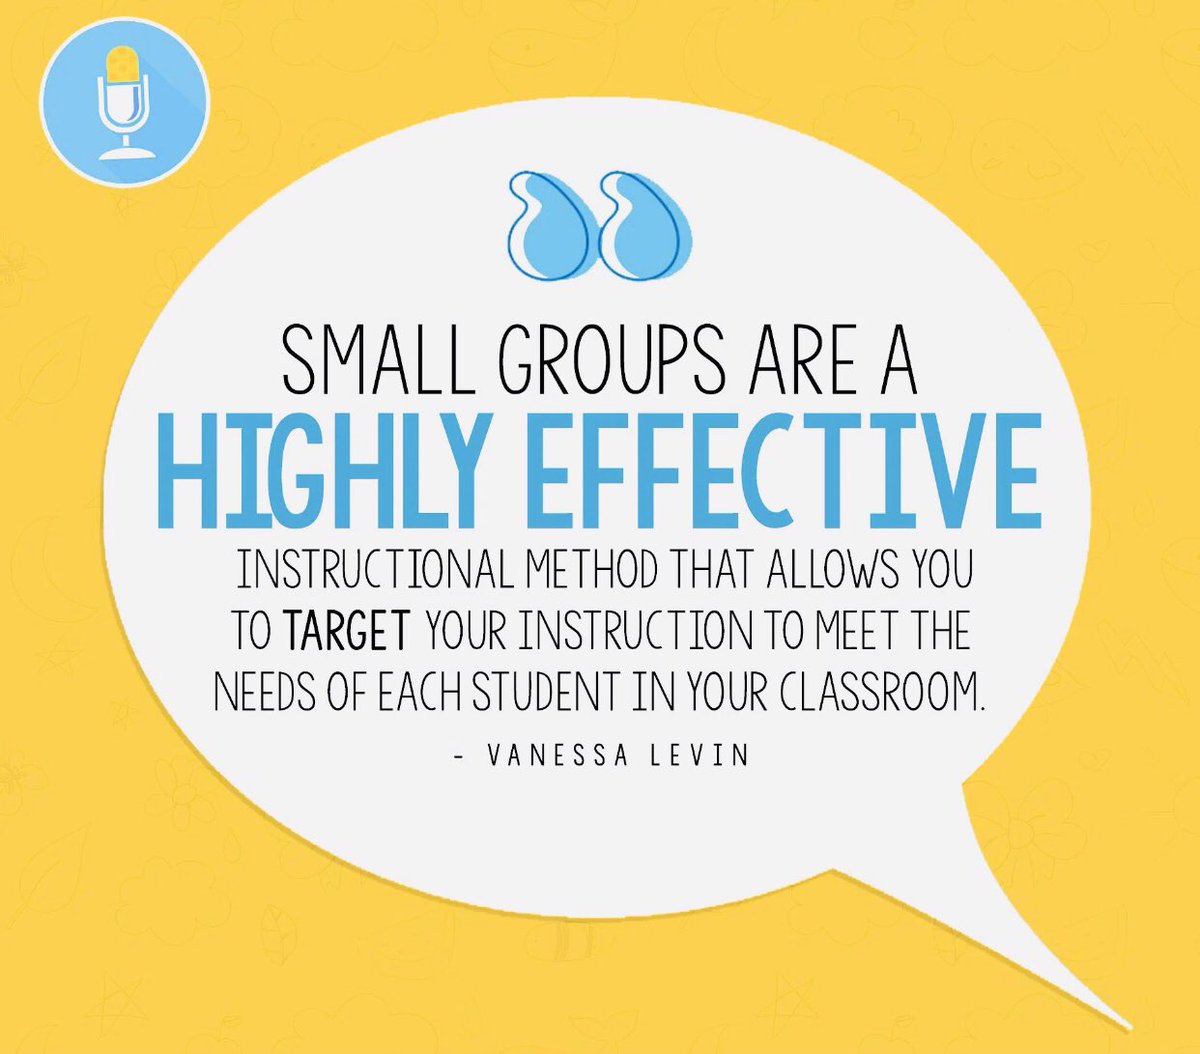 The benefits of small group instruction provide highly effective instructional methods! #bhsstem #smallgroupinstruction